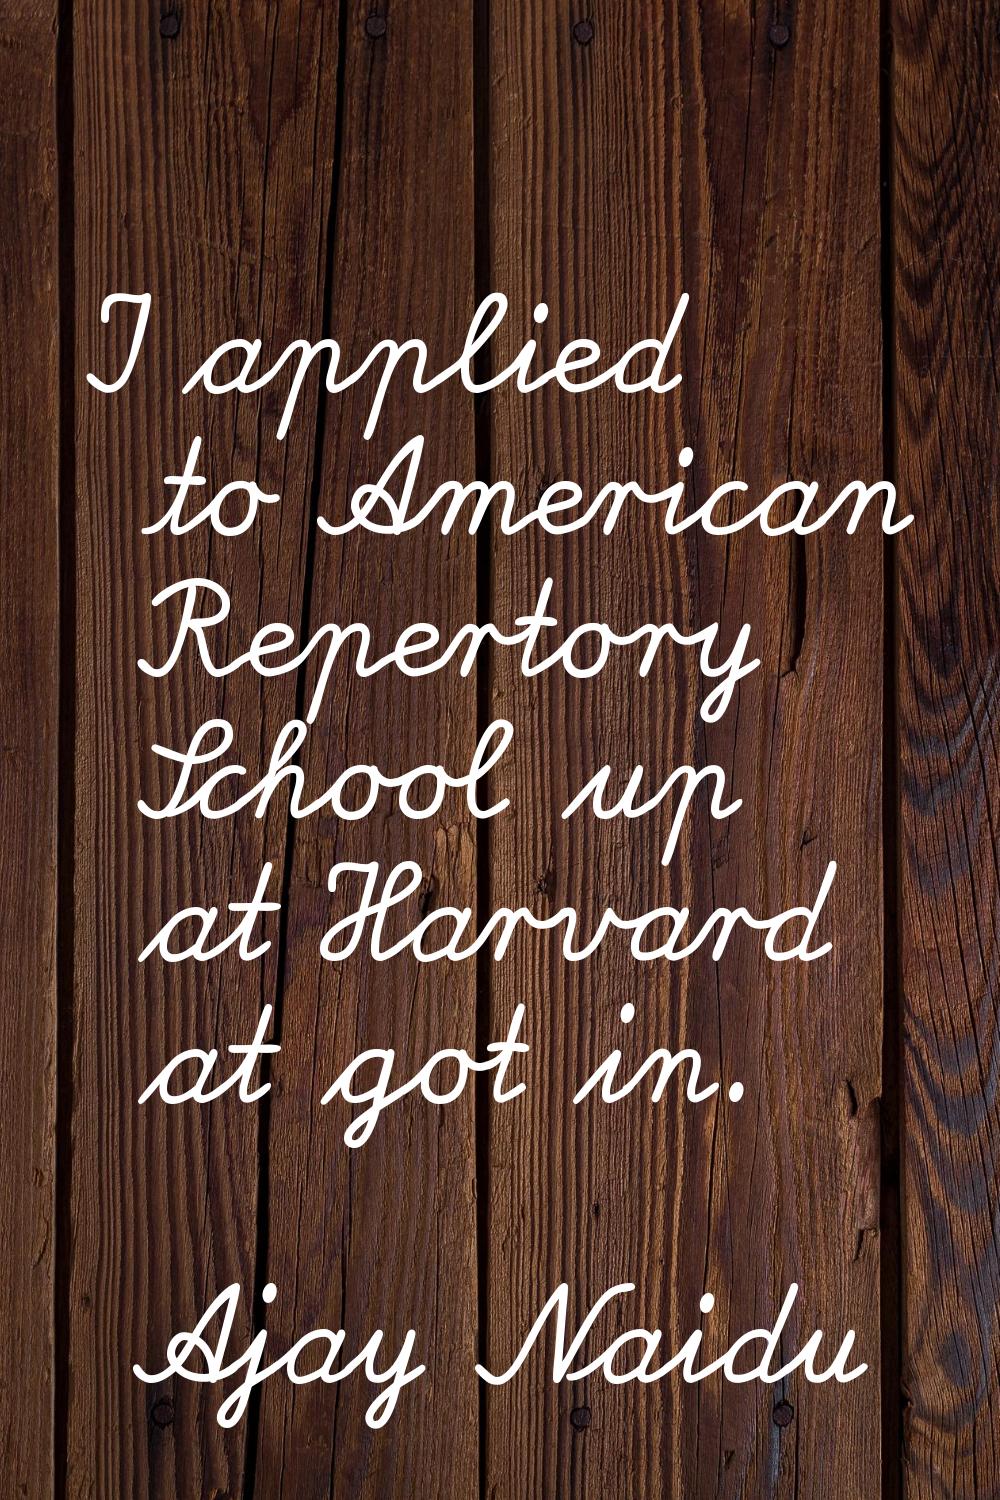 I applied to American Repertory School up at Harvard at got in.